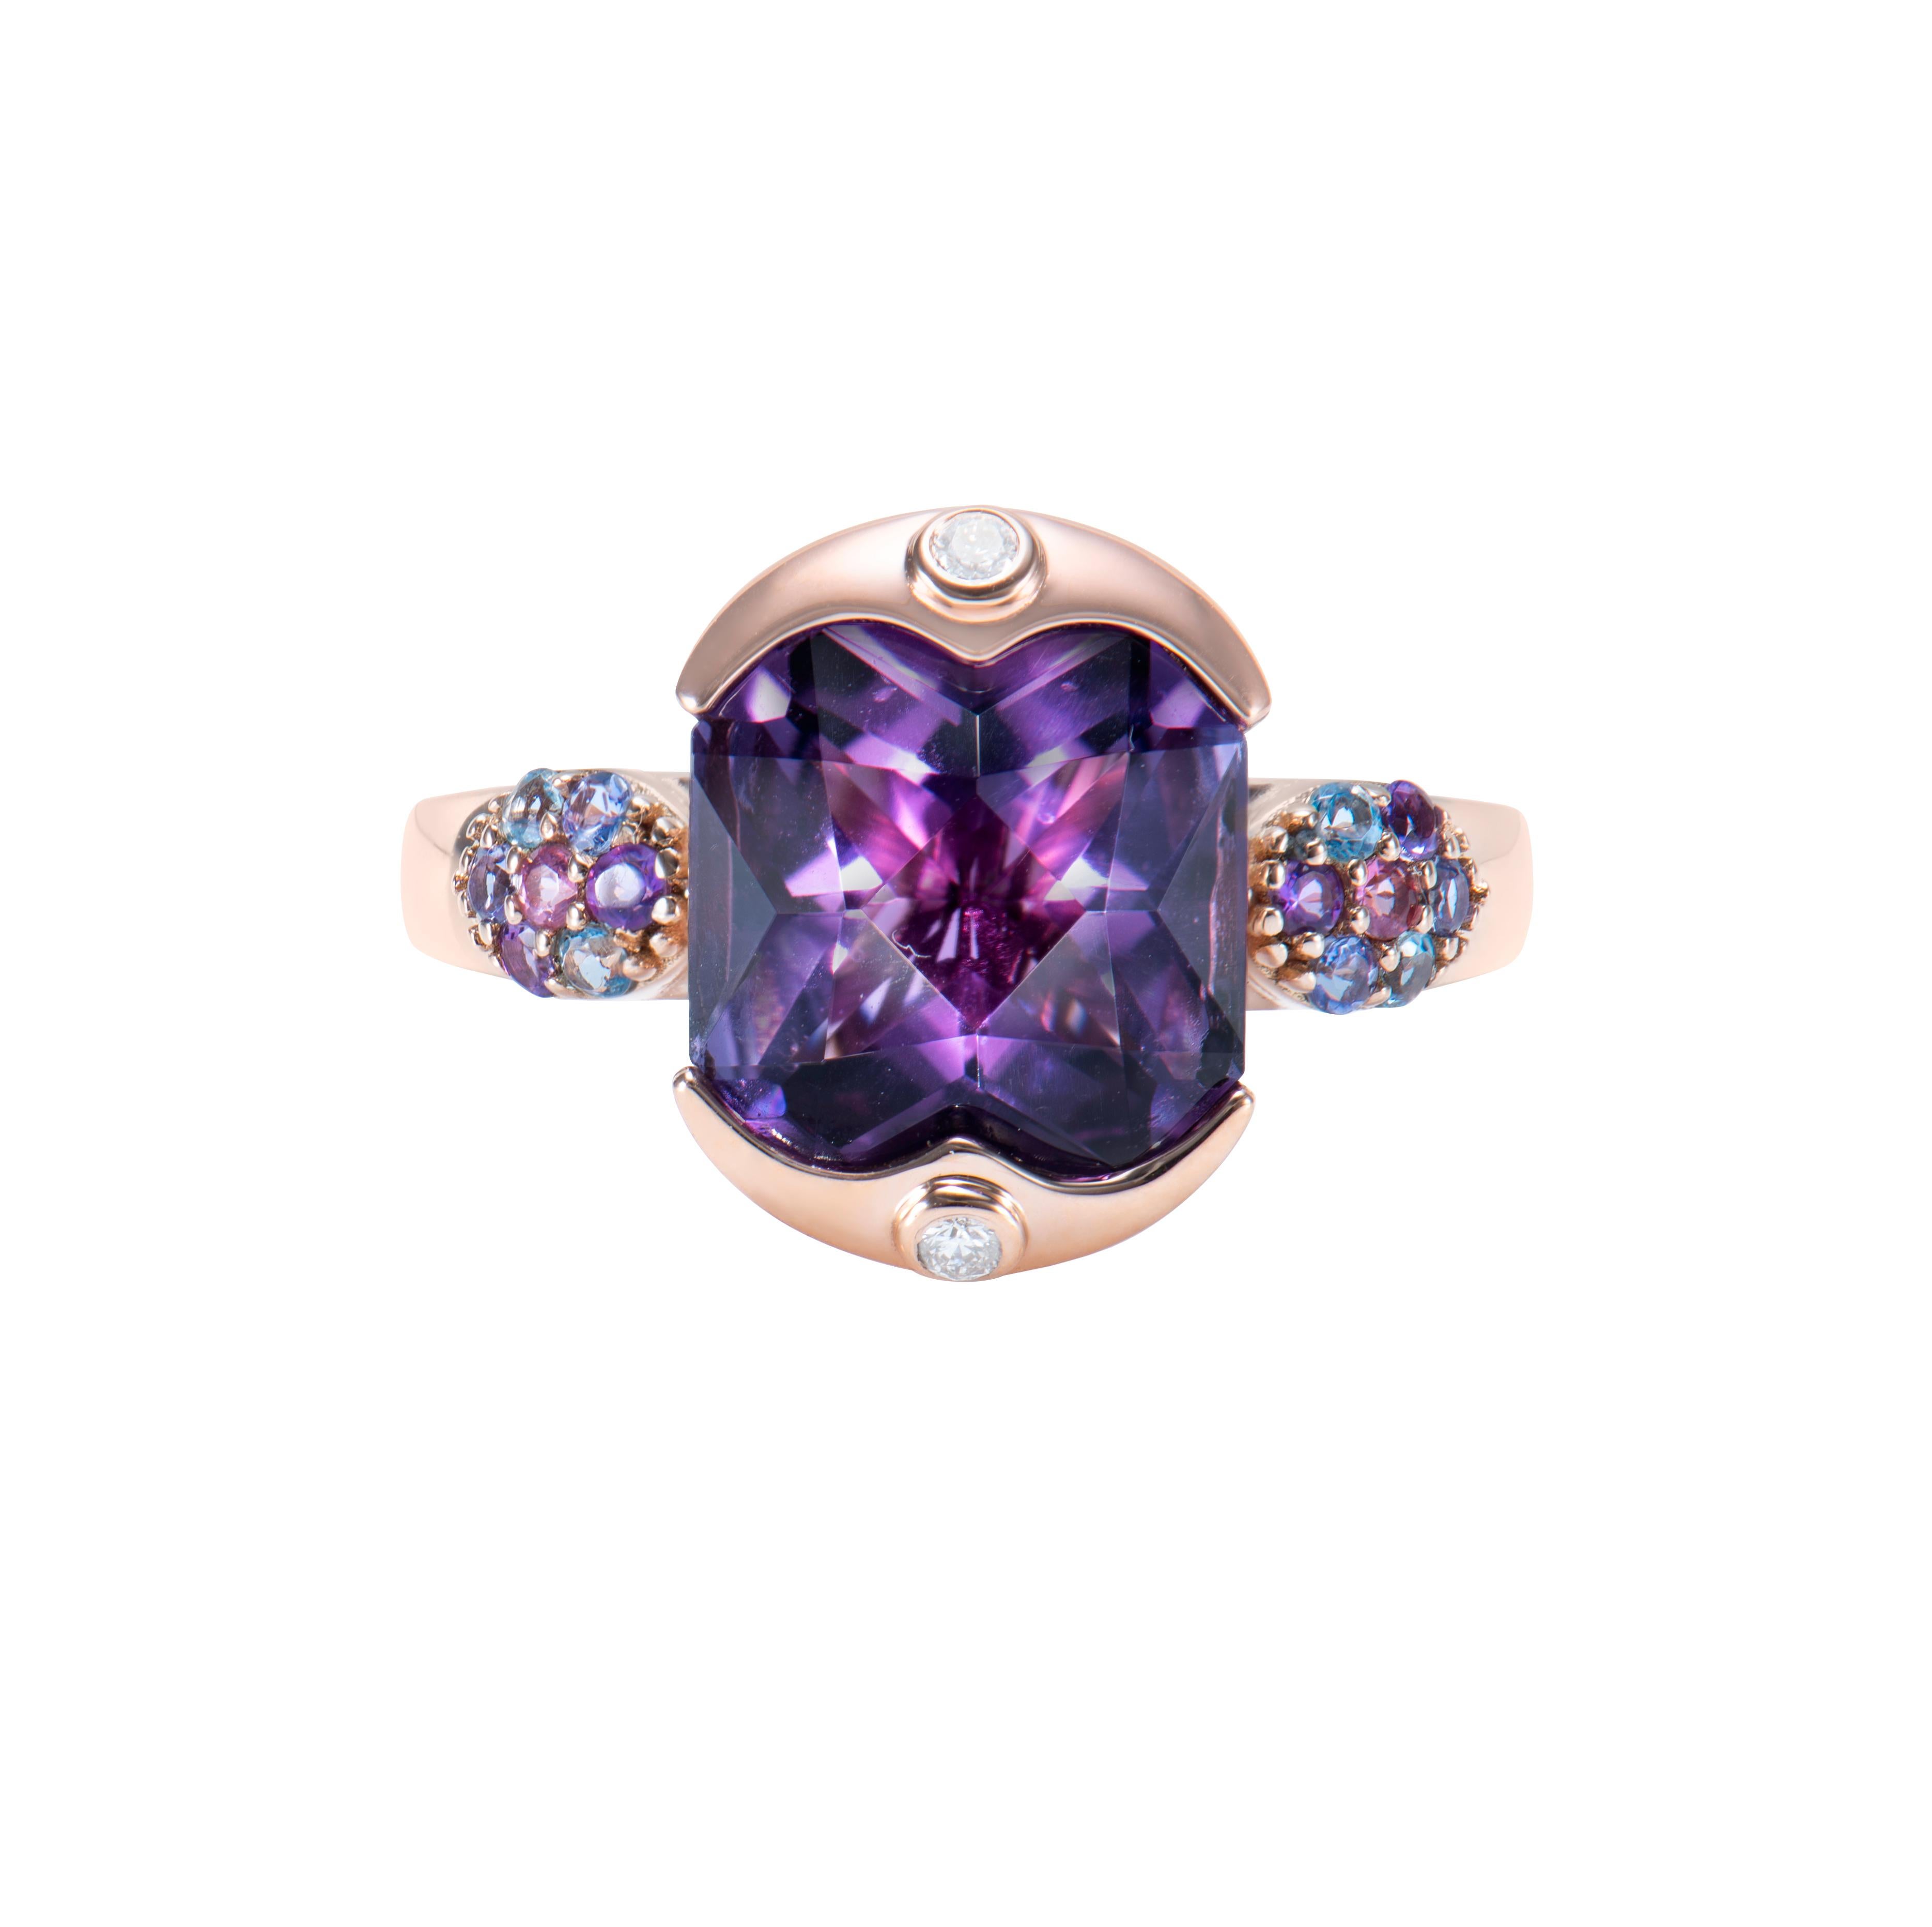 Contemporary Amethyst, Multi Gemstone and White Diamond Ring in 18 Karat Rose Gold. For Sale